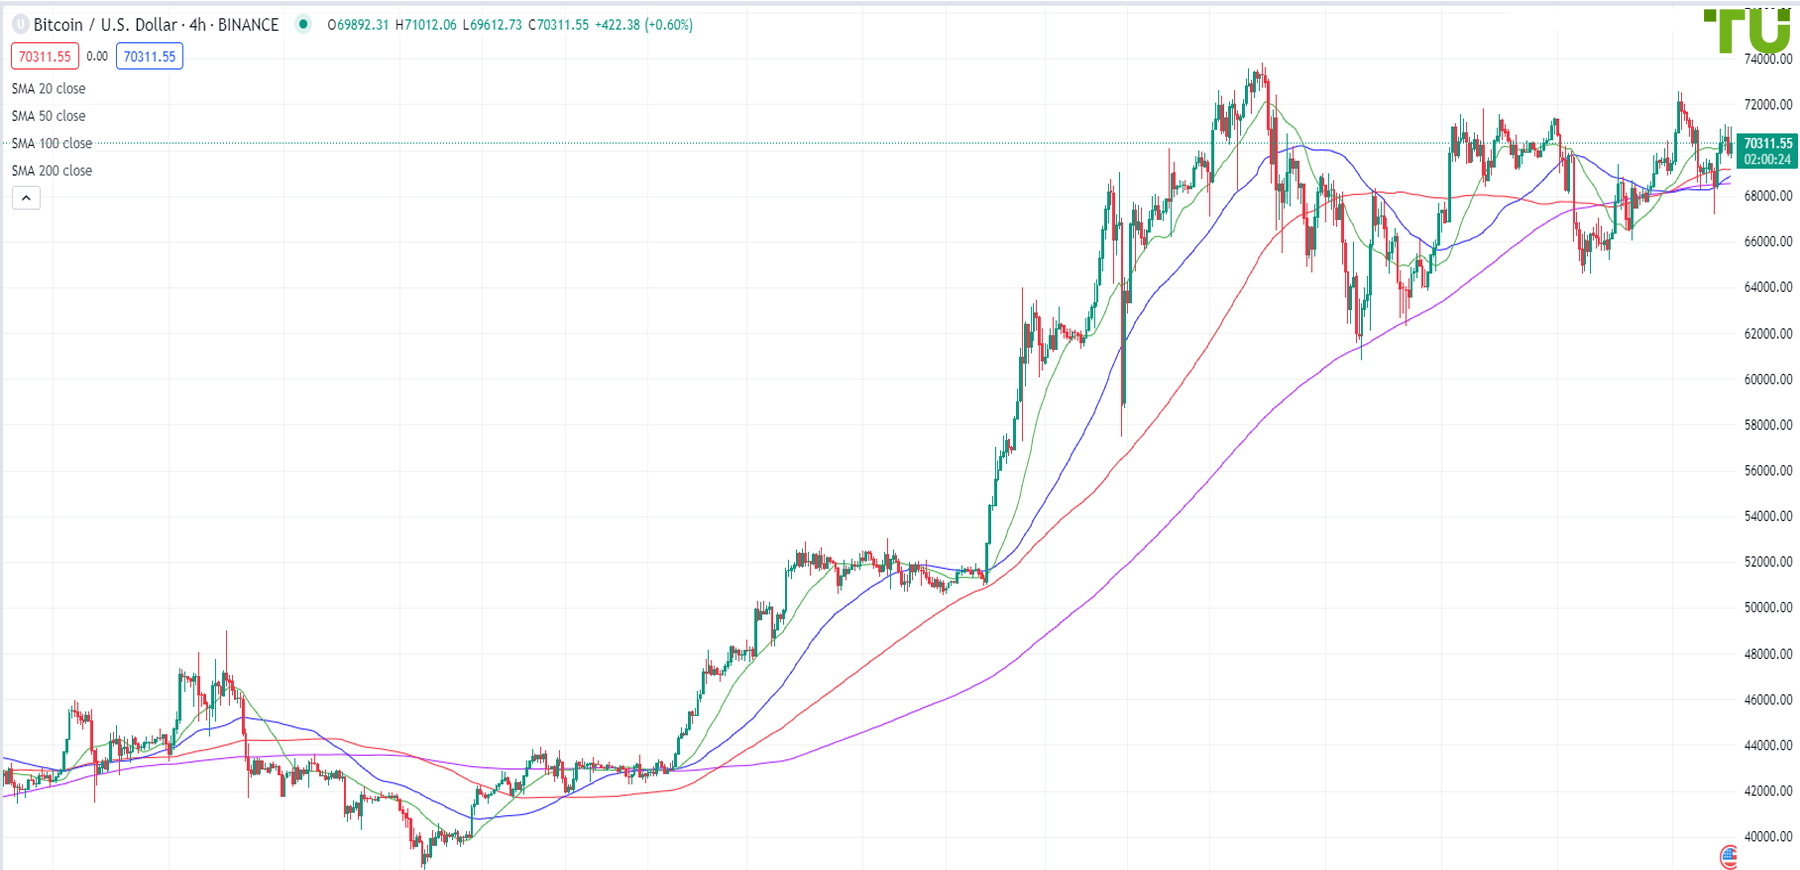 BTC/USD is bought on the fall and sold on the rise